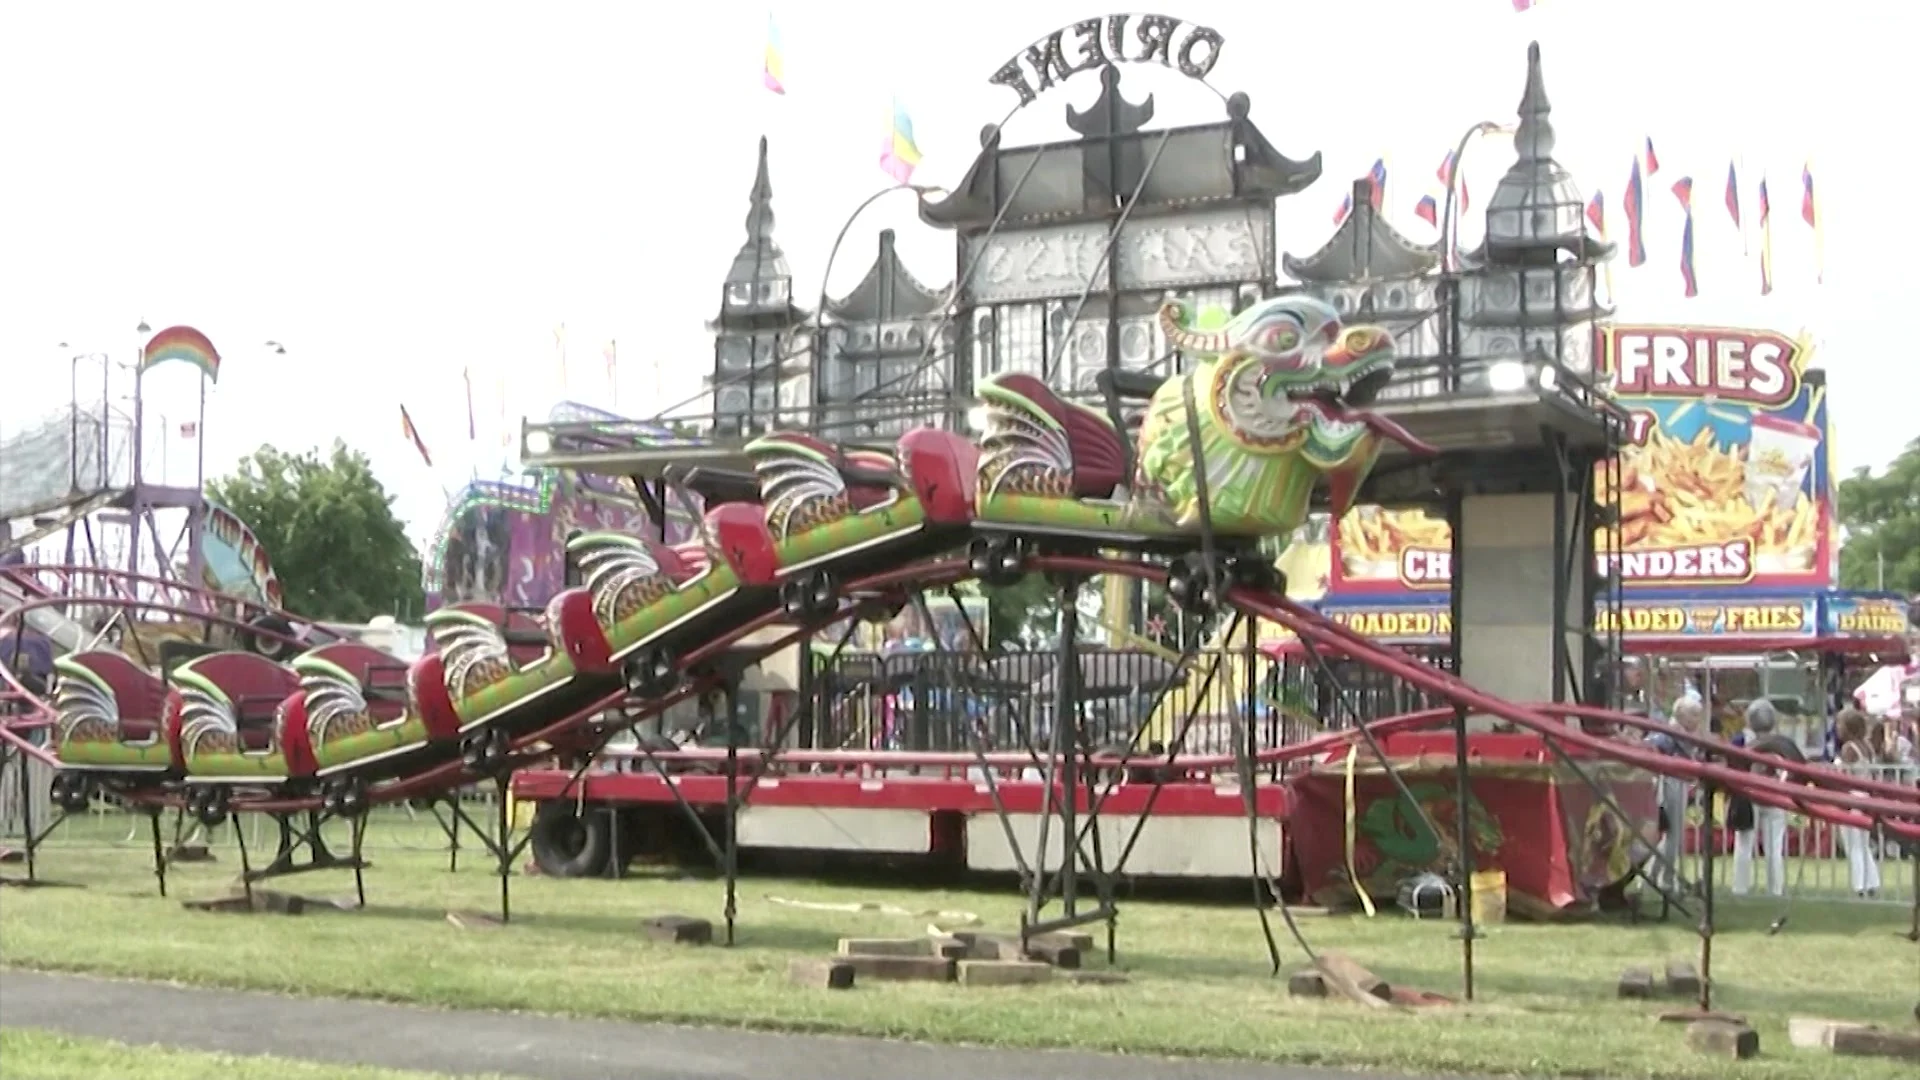 Police: Ride partially goes off track at carnival in Dobbs Ferry 